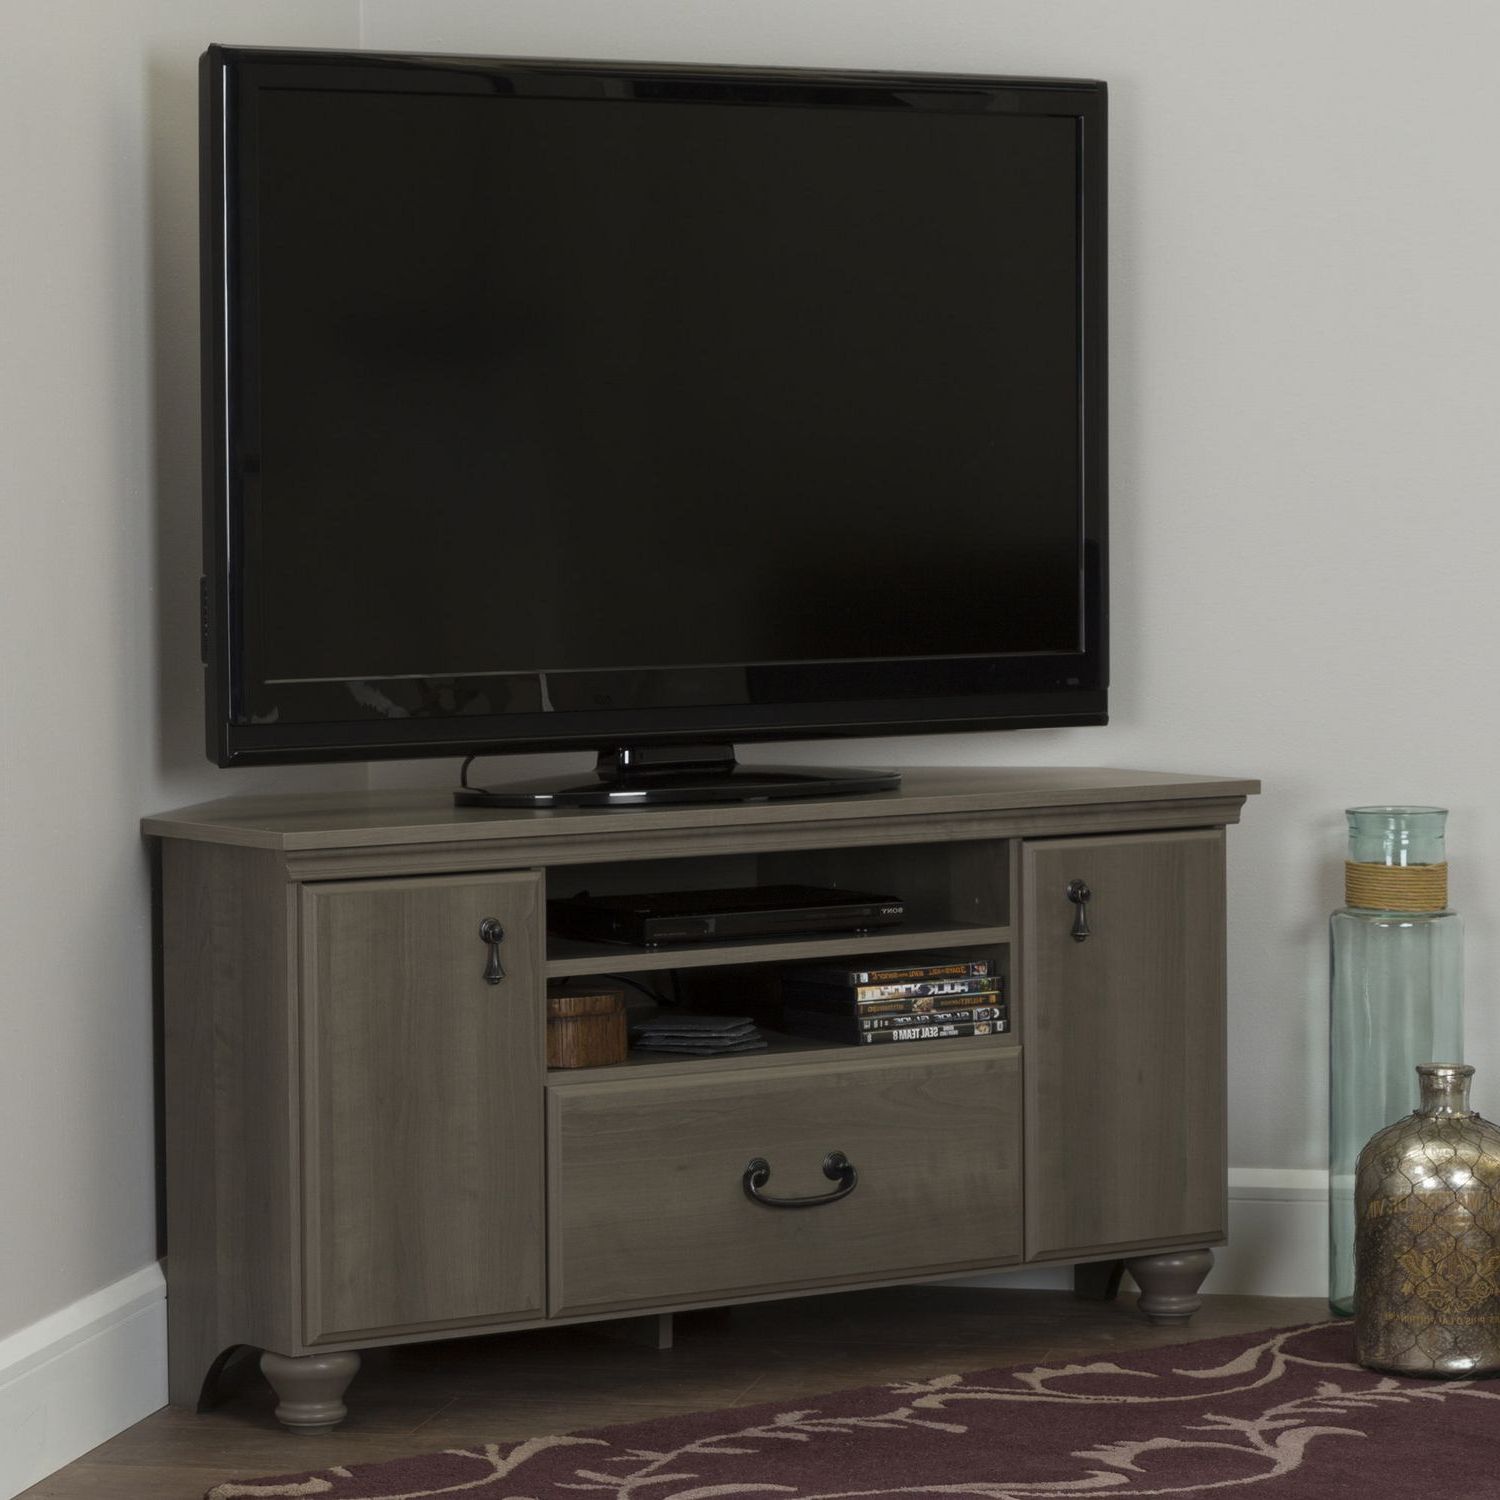 Fashionable Camden Corner Tv Stands For Tvs Up To 60" Intended For South Shore Noble Corner Tv Stand For Tv's Up To 60 Inches (View 6 of 10)